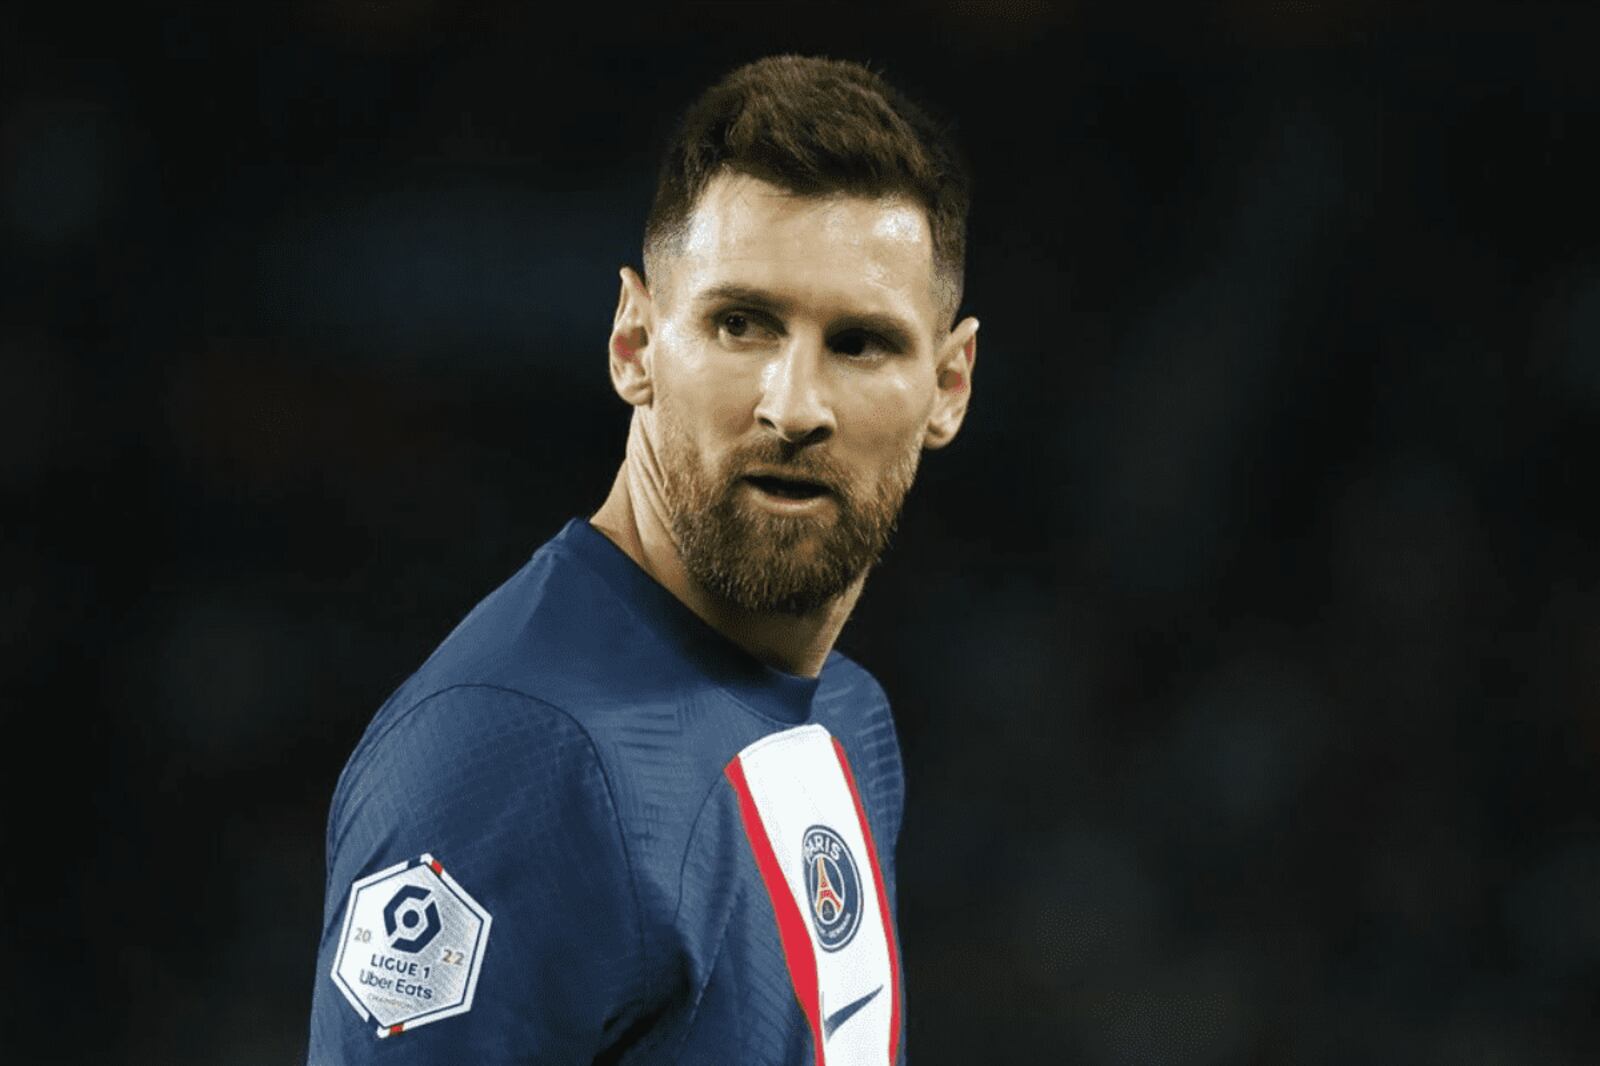 While PSG fans don't want to see Messi, the European giant that's angry with Lionel